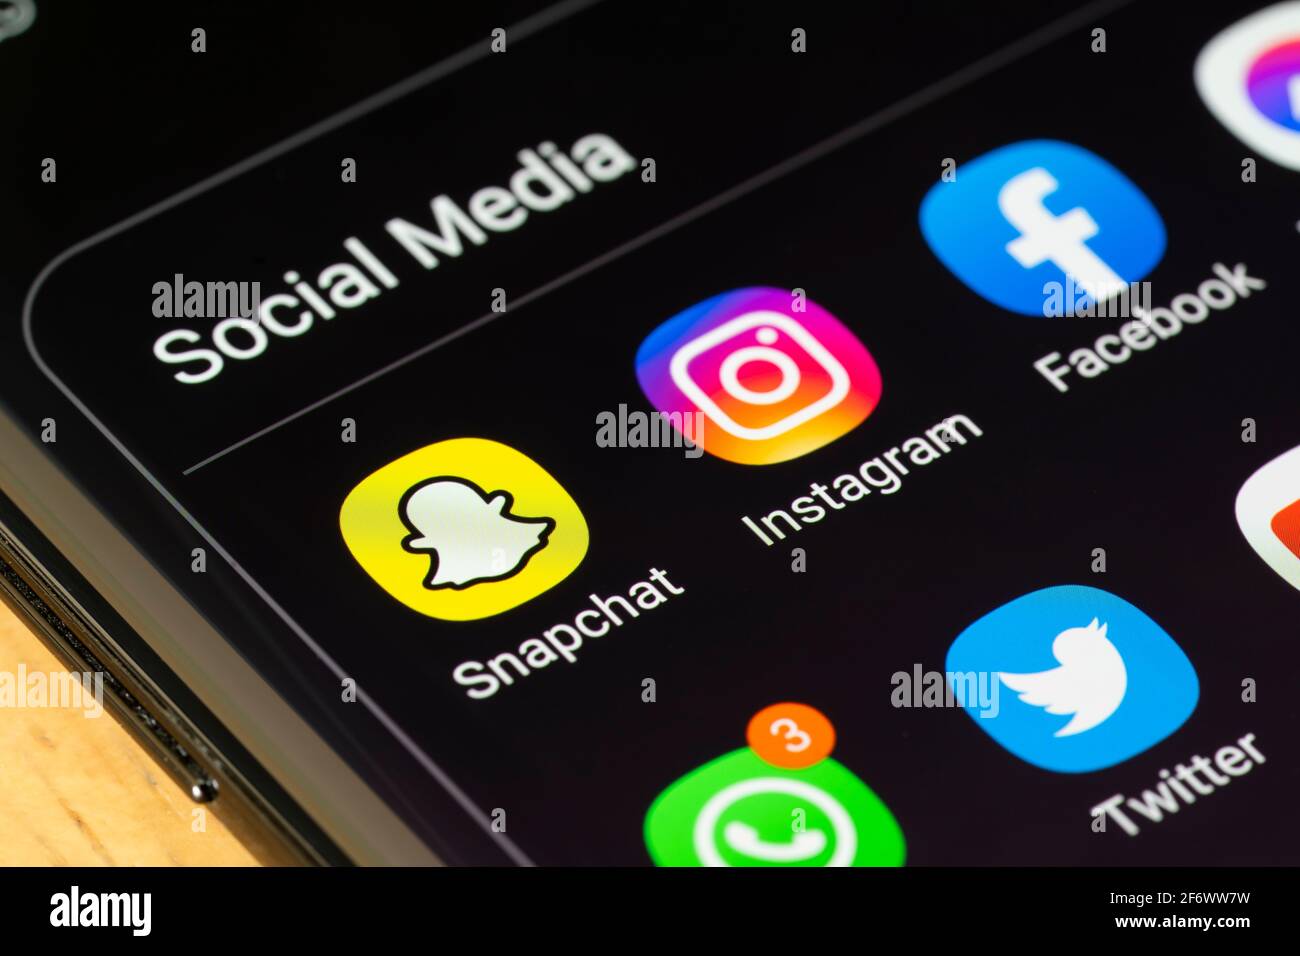 A grouped selection of icons for multimedia Social Media apps in a folder on a smartphone screen, including Snapchat, Instagram, Facebook and Twitter Stock Photo